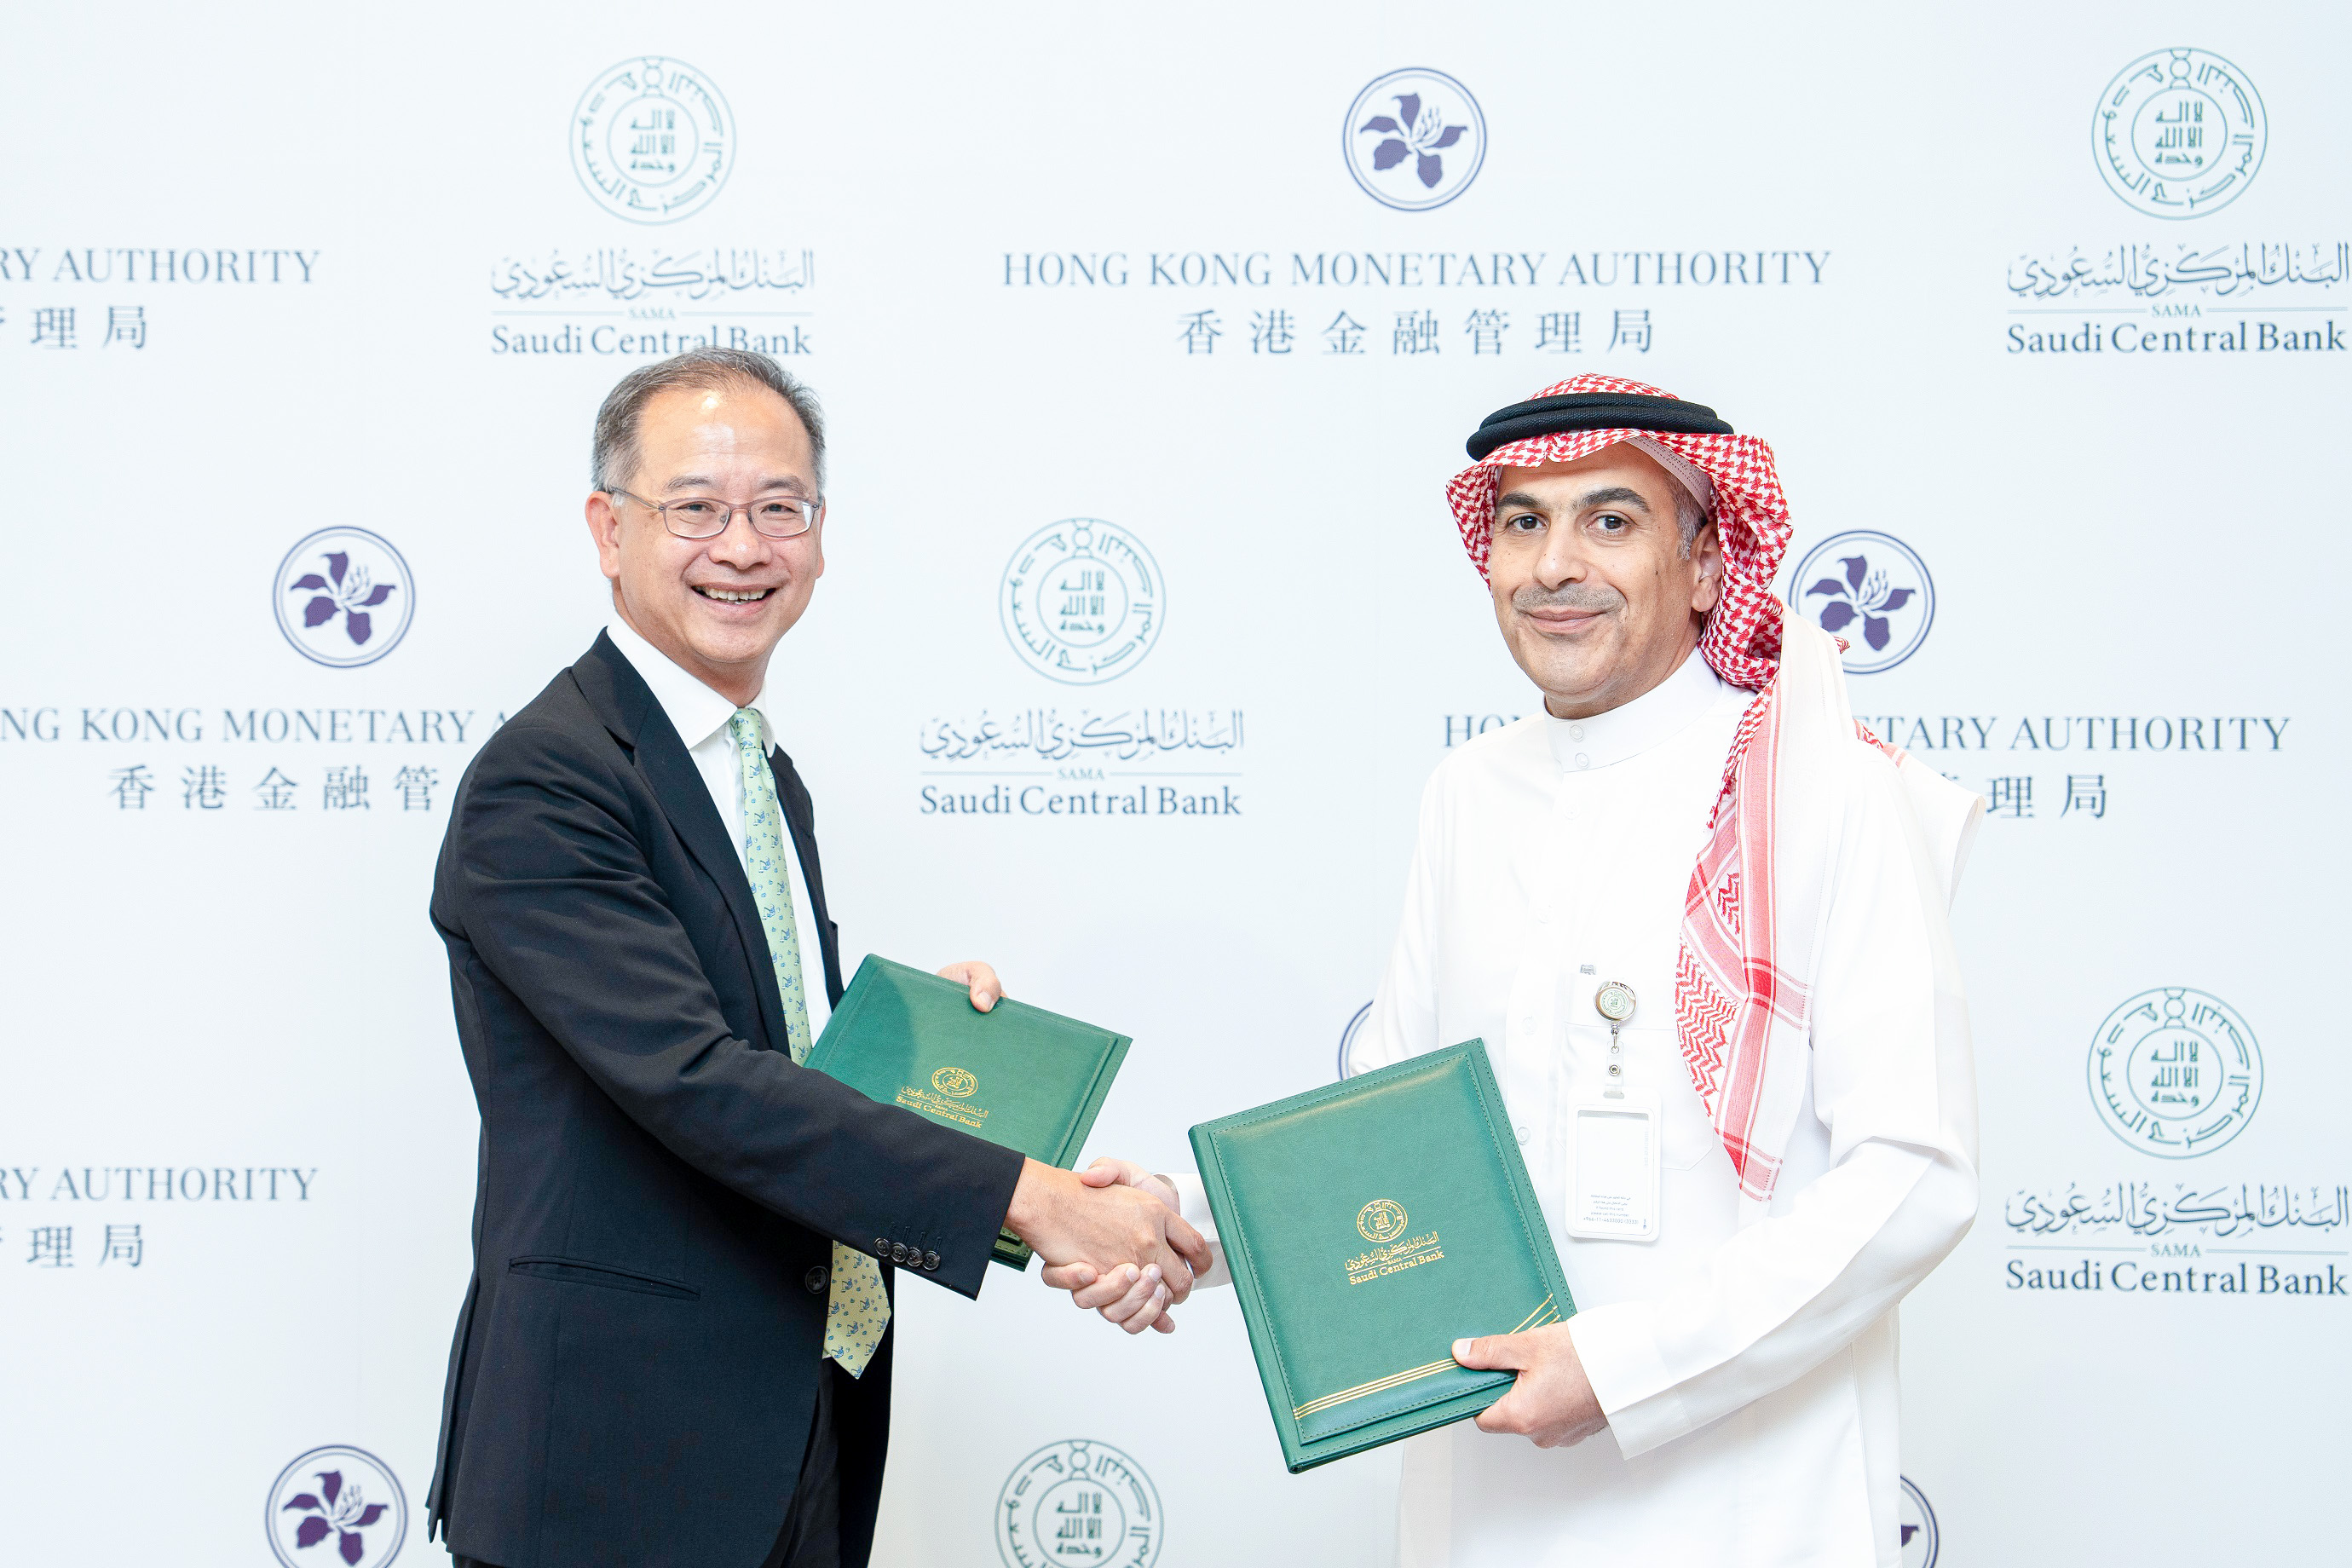 The Chief Executive of the Hong Kong Monetary Authority, Mr Eddie Yue (left) and the Governor of the Saudi Central Bank, Mr Ayman Alsayari (right) signed a Memorandum of Understanding on 26 July (Riyadh time) to promote collaboration on financial innovation.